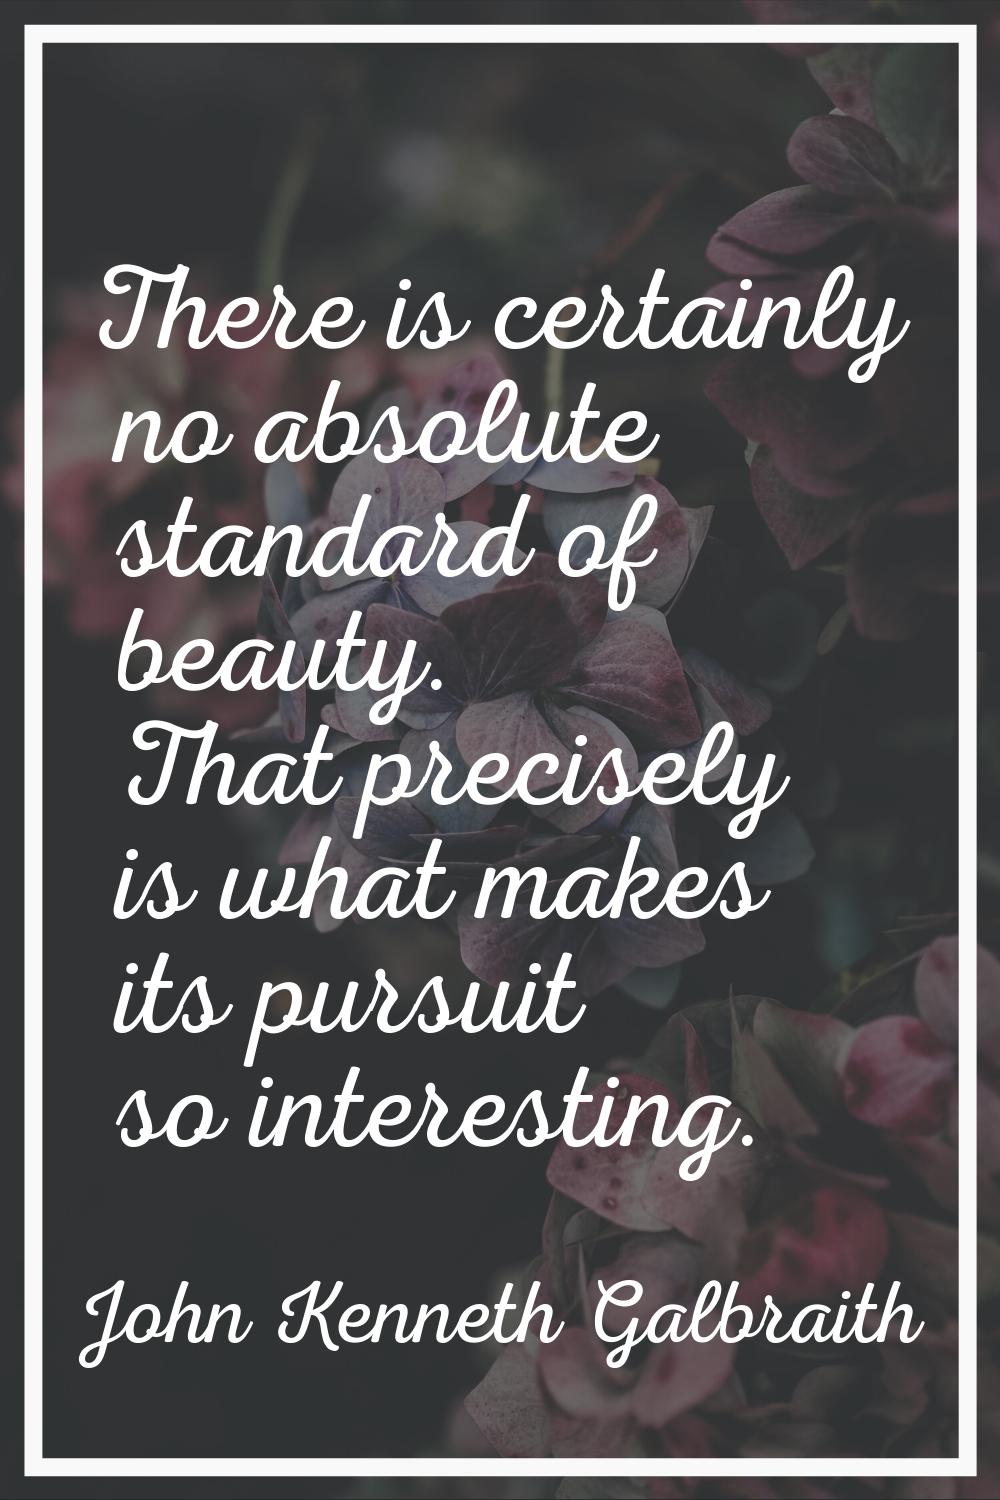 There is certainly no absolute standard of beauty. That precisely is what makes its pursuit so inte